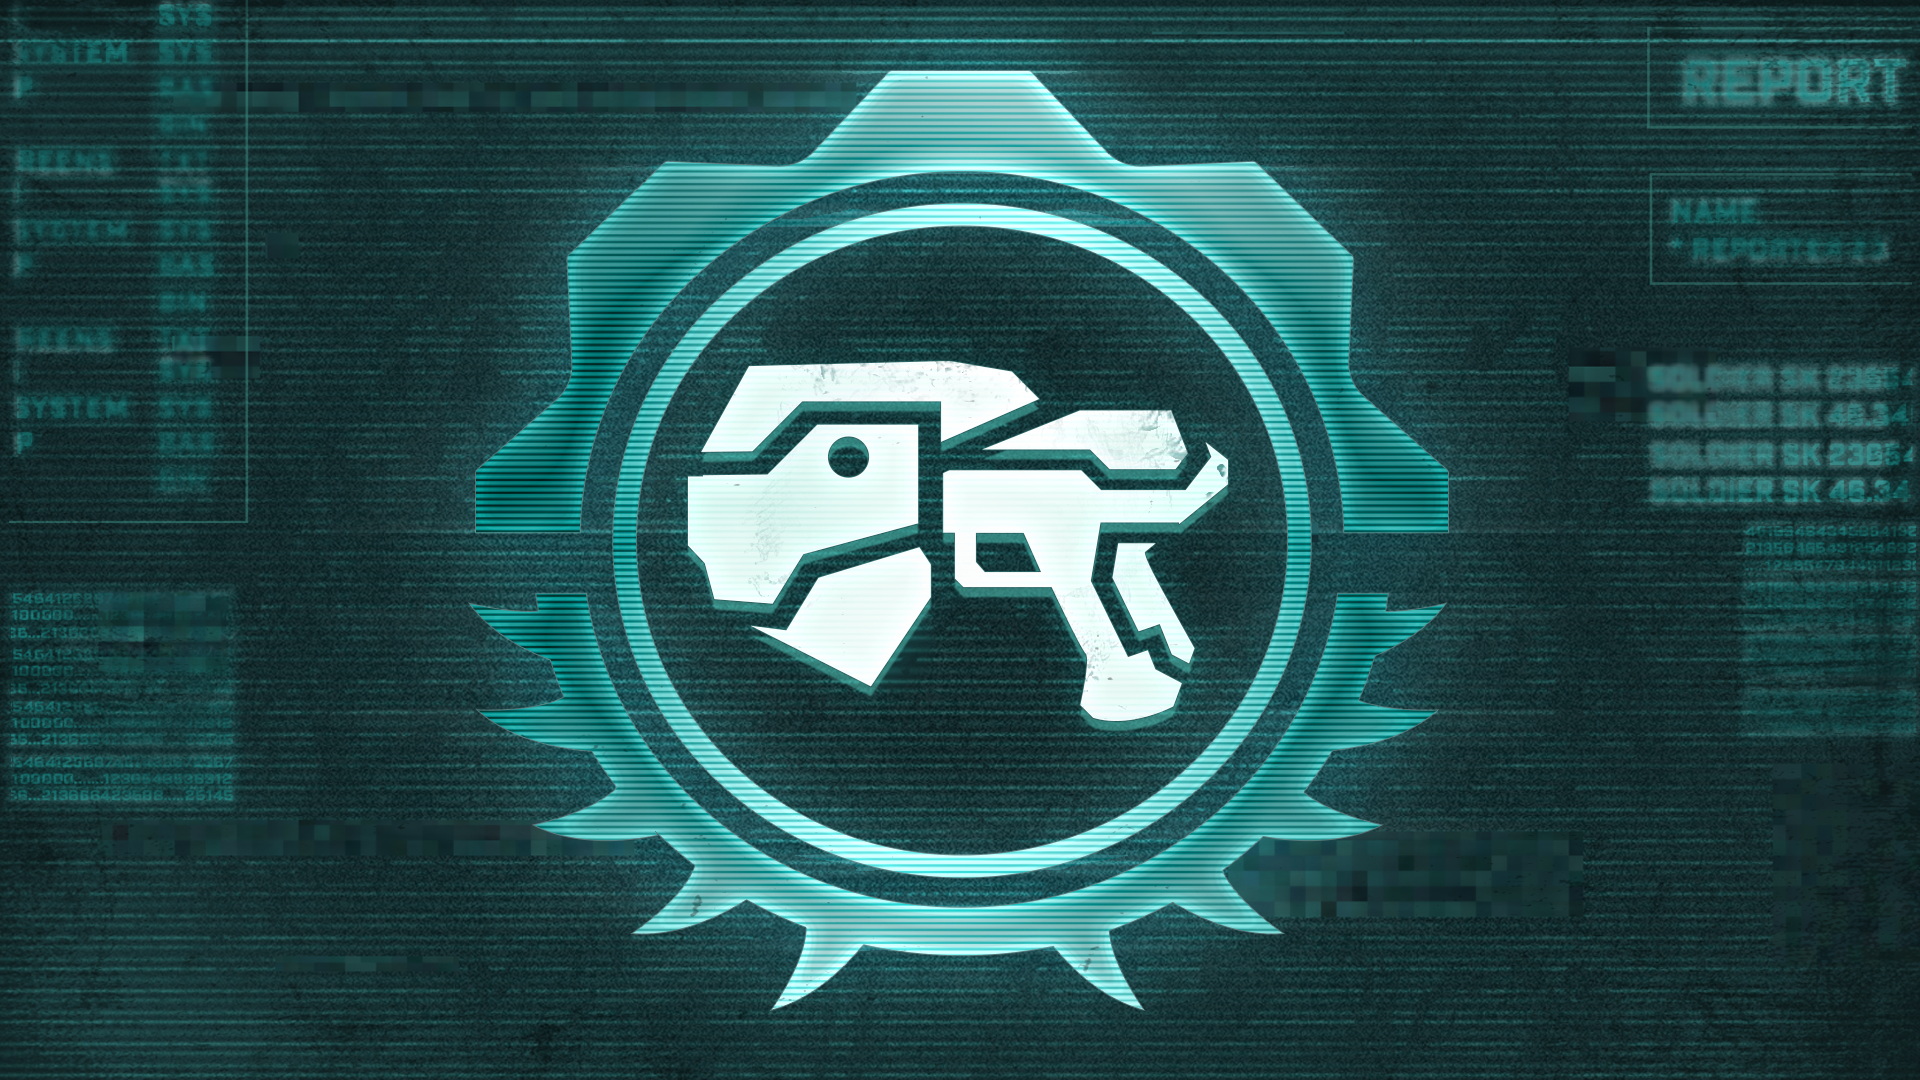 Icon for High Noon